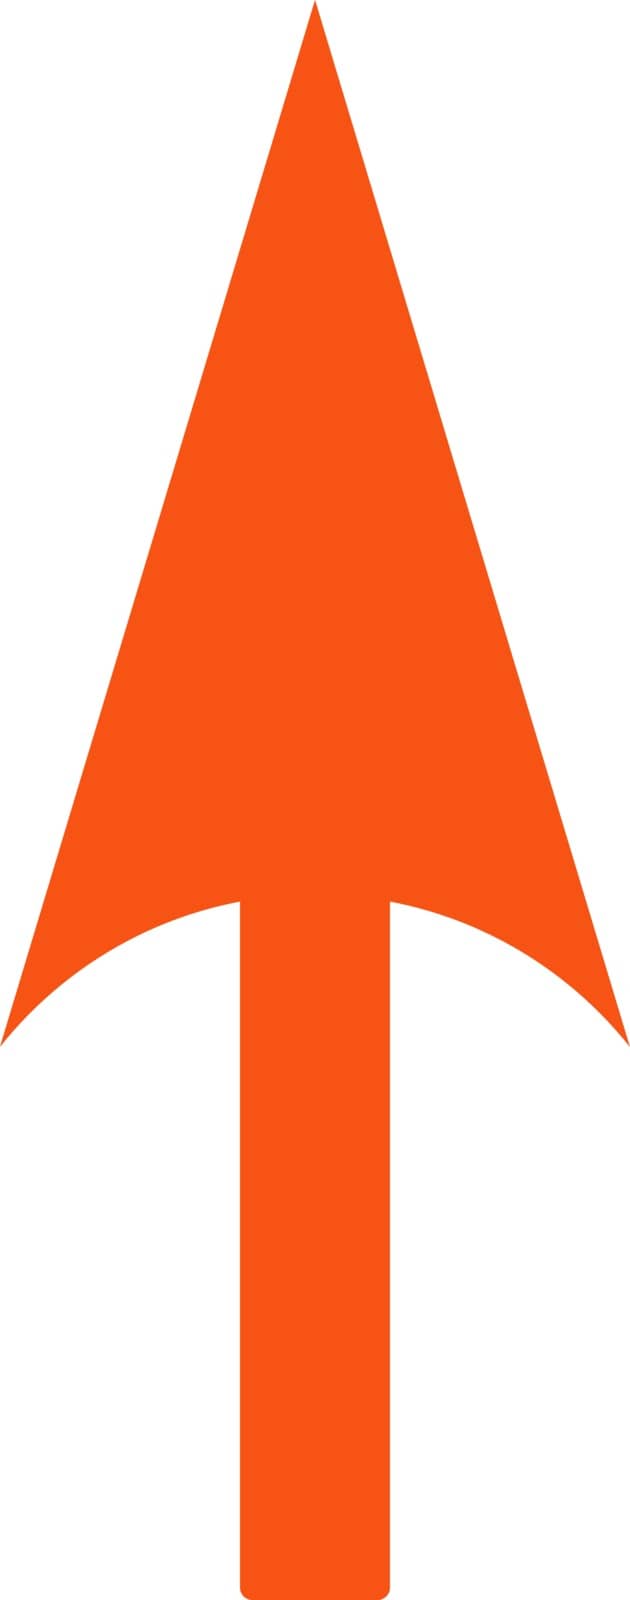 Arrow Axis Y icon from Primitive Set. This isolated flat symbol is drawn with orange color on a white background, angles are rounded.